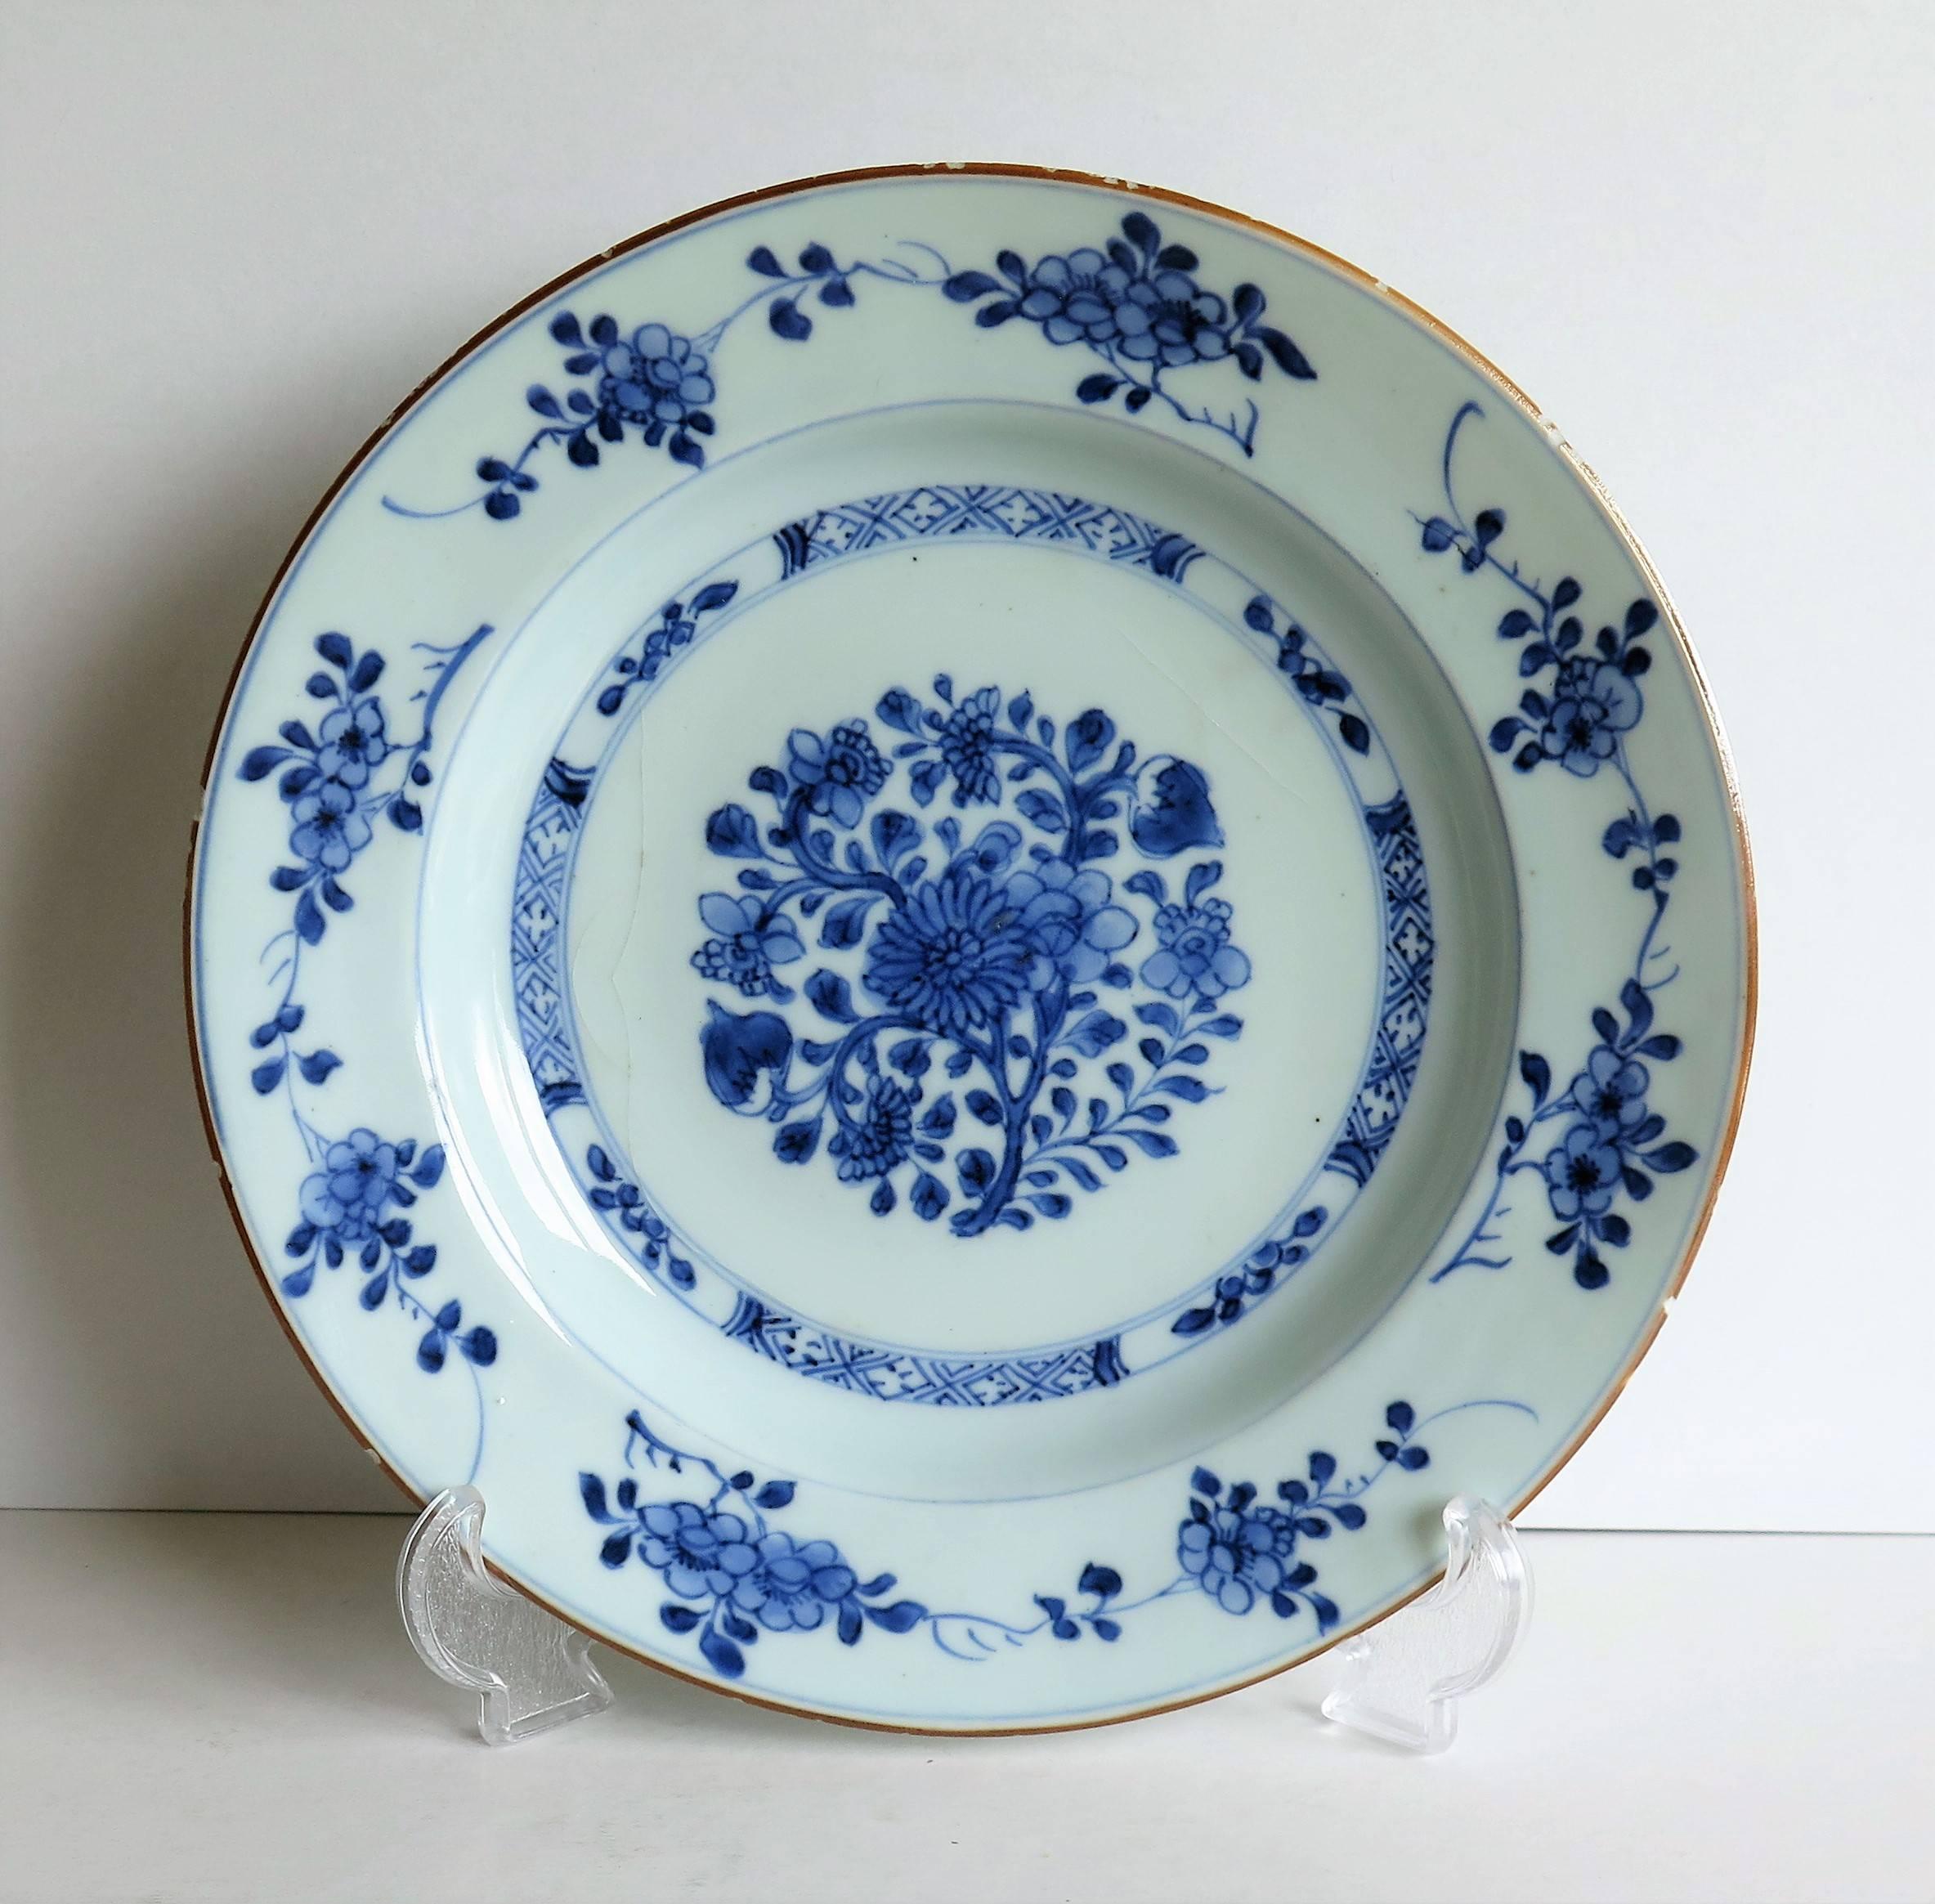 This is a beautifully hand-painted Chinese porcelain plate from the first half of the 18th century, Qing period, circa 1735.

The plate is finely potted with a carefully cut base rim and a lovely rich glassy, glaze with has a very light shade of